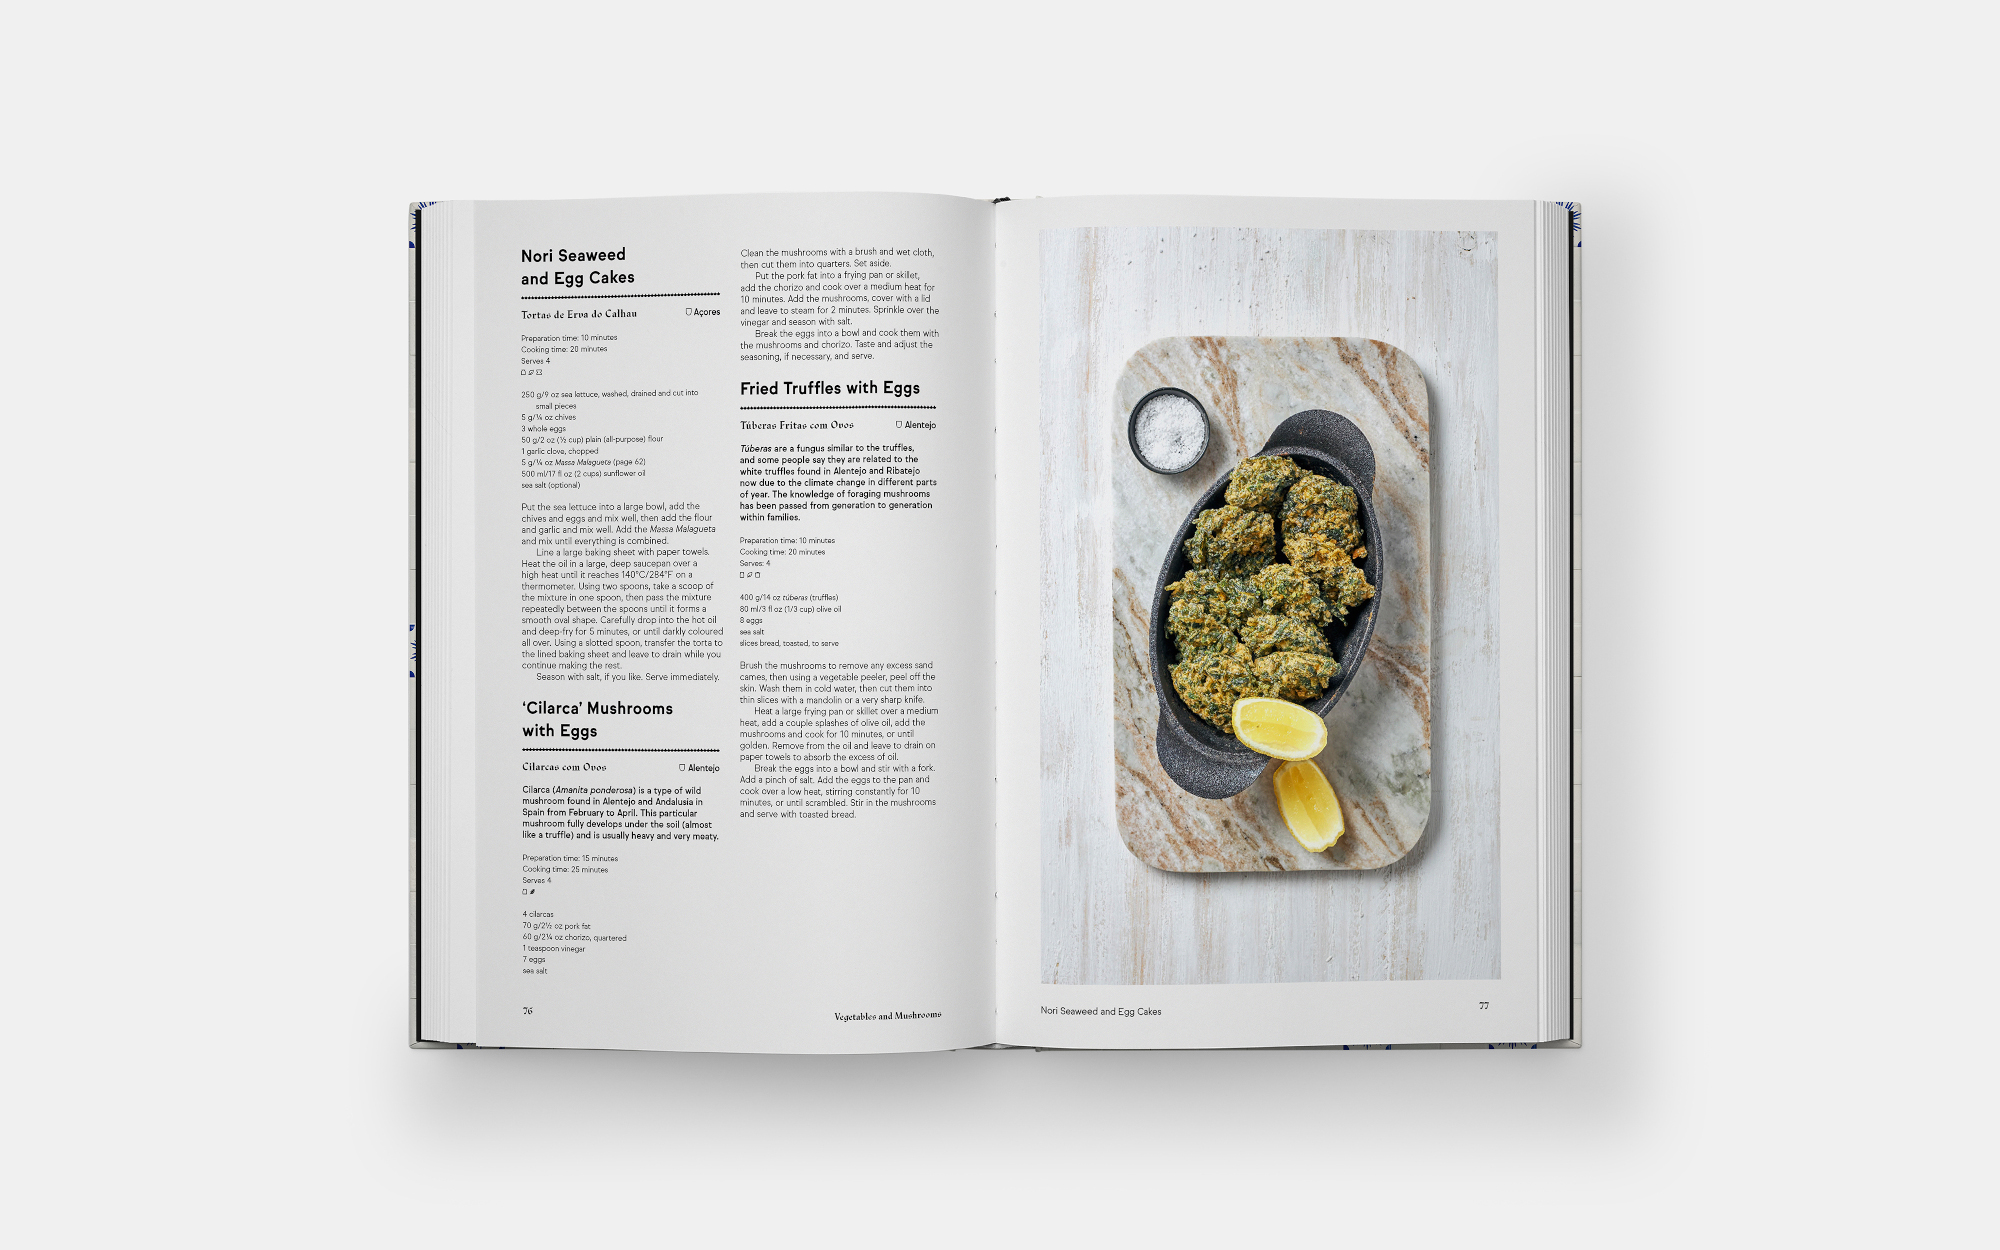 Pages from Portugal: The Cookbook